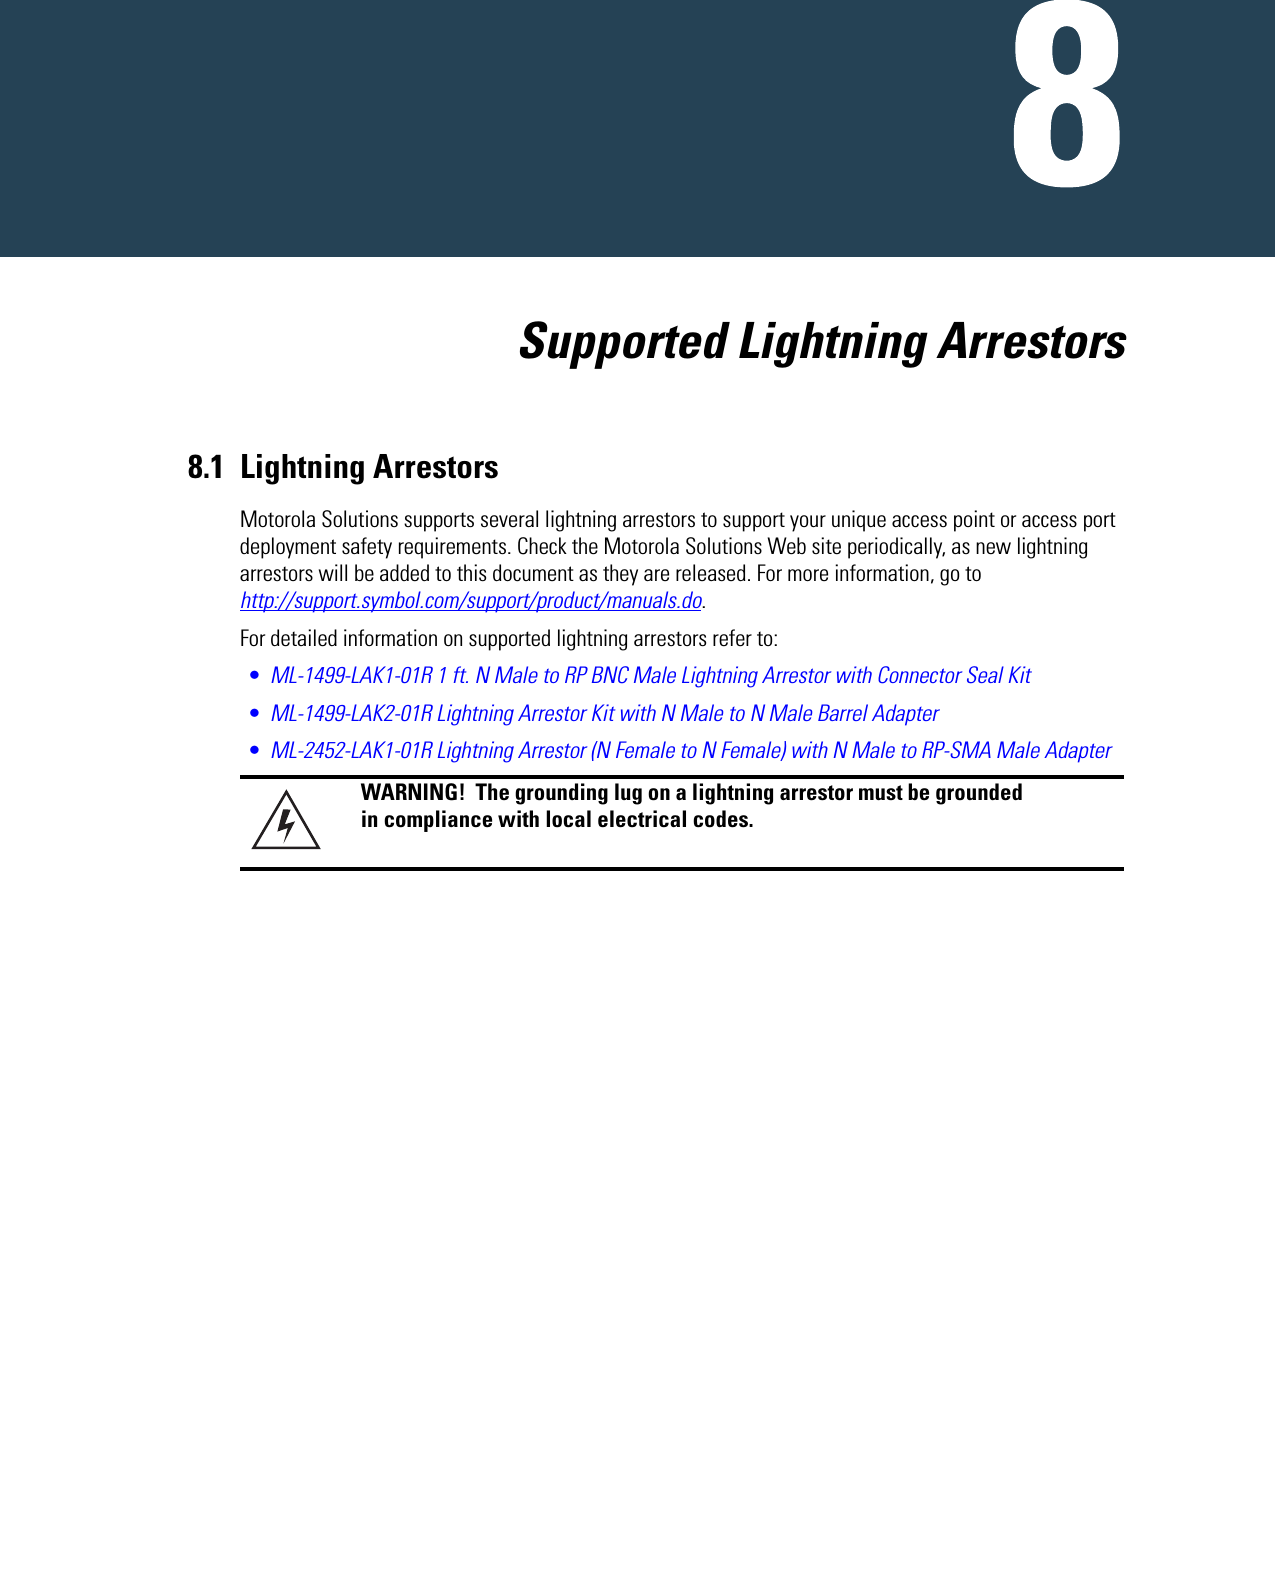      Supported Lightning Arrestors8.1 Lightning Arrestors Motorola Solutions supports several lightning arrestors to support your unique access point or access port deployment safety requirements. Check the Motorola Solutions Web site periodically, as new lightning arrestors will be added to this document as they are released. For more information, go to http://support.symbol.com/support/product/manuals.do.For detailed information on supported lightning arrestors refer to:•ML-1499-LAK1-01R 1 ft. N Male to RP BNC Male Lightning Arrestor with Connector Seal Kit•ML-1499-LAK2-01R Lightning Arrestor Kit with N Male to N Male Barrel Adapter•ML-2452-LAK1-01R Lightning Arrestor (N Female to N Female) with N Male to RP-SMA Male AdapterWARNING!  The grounding lug on a lightning arrestor must be grounded in compliance with local electrical codes.